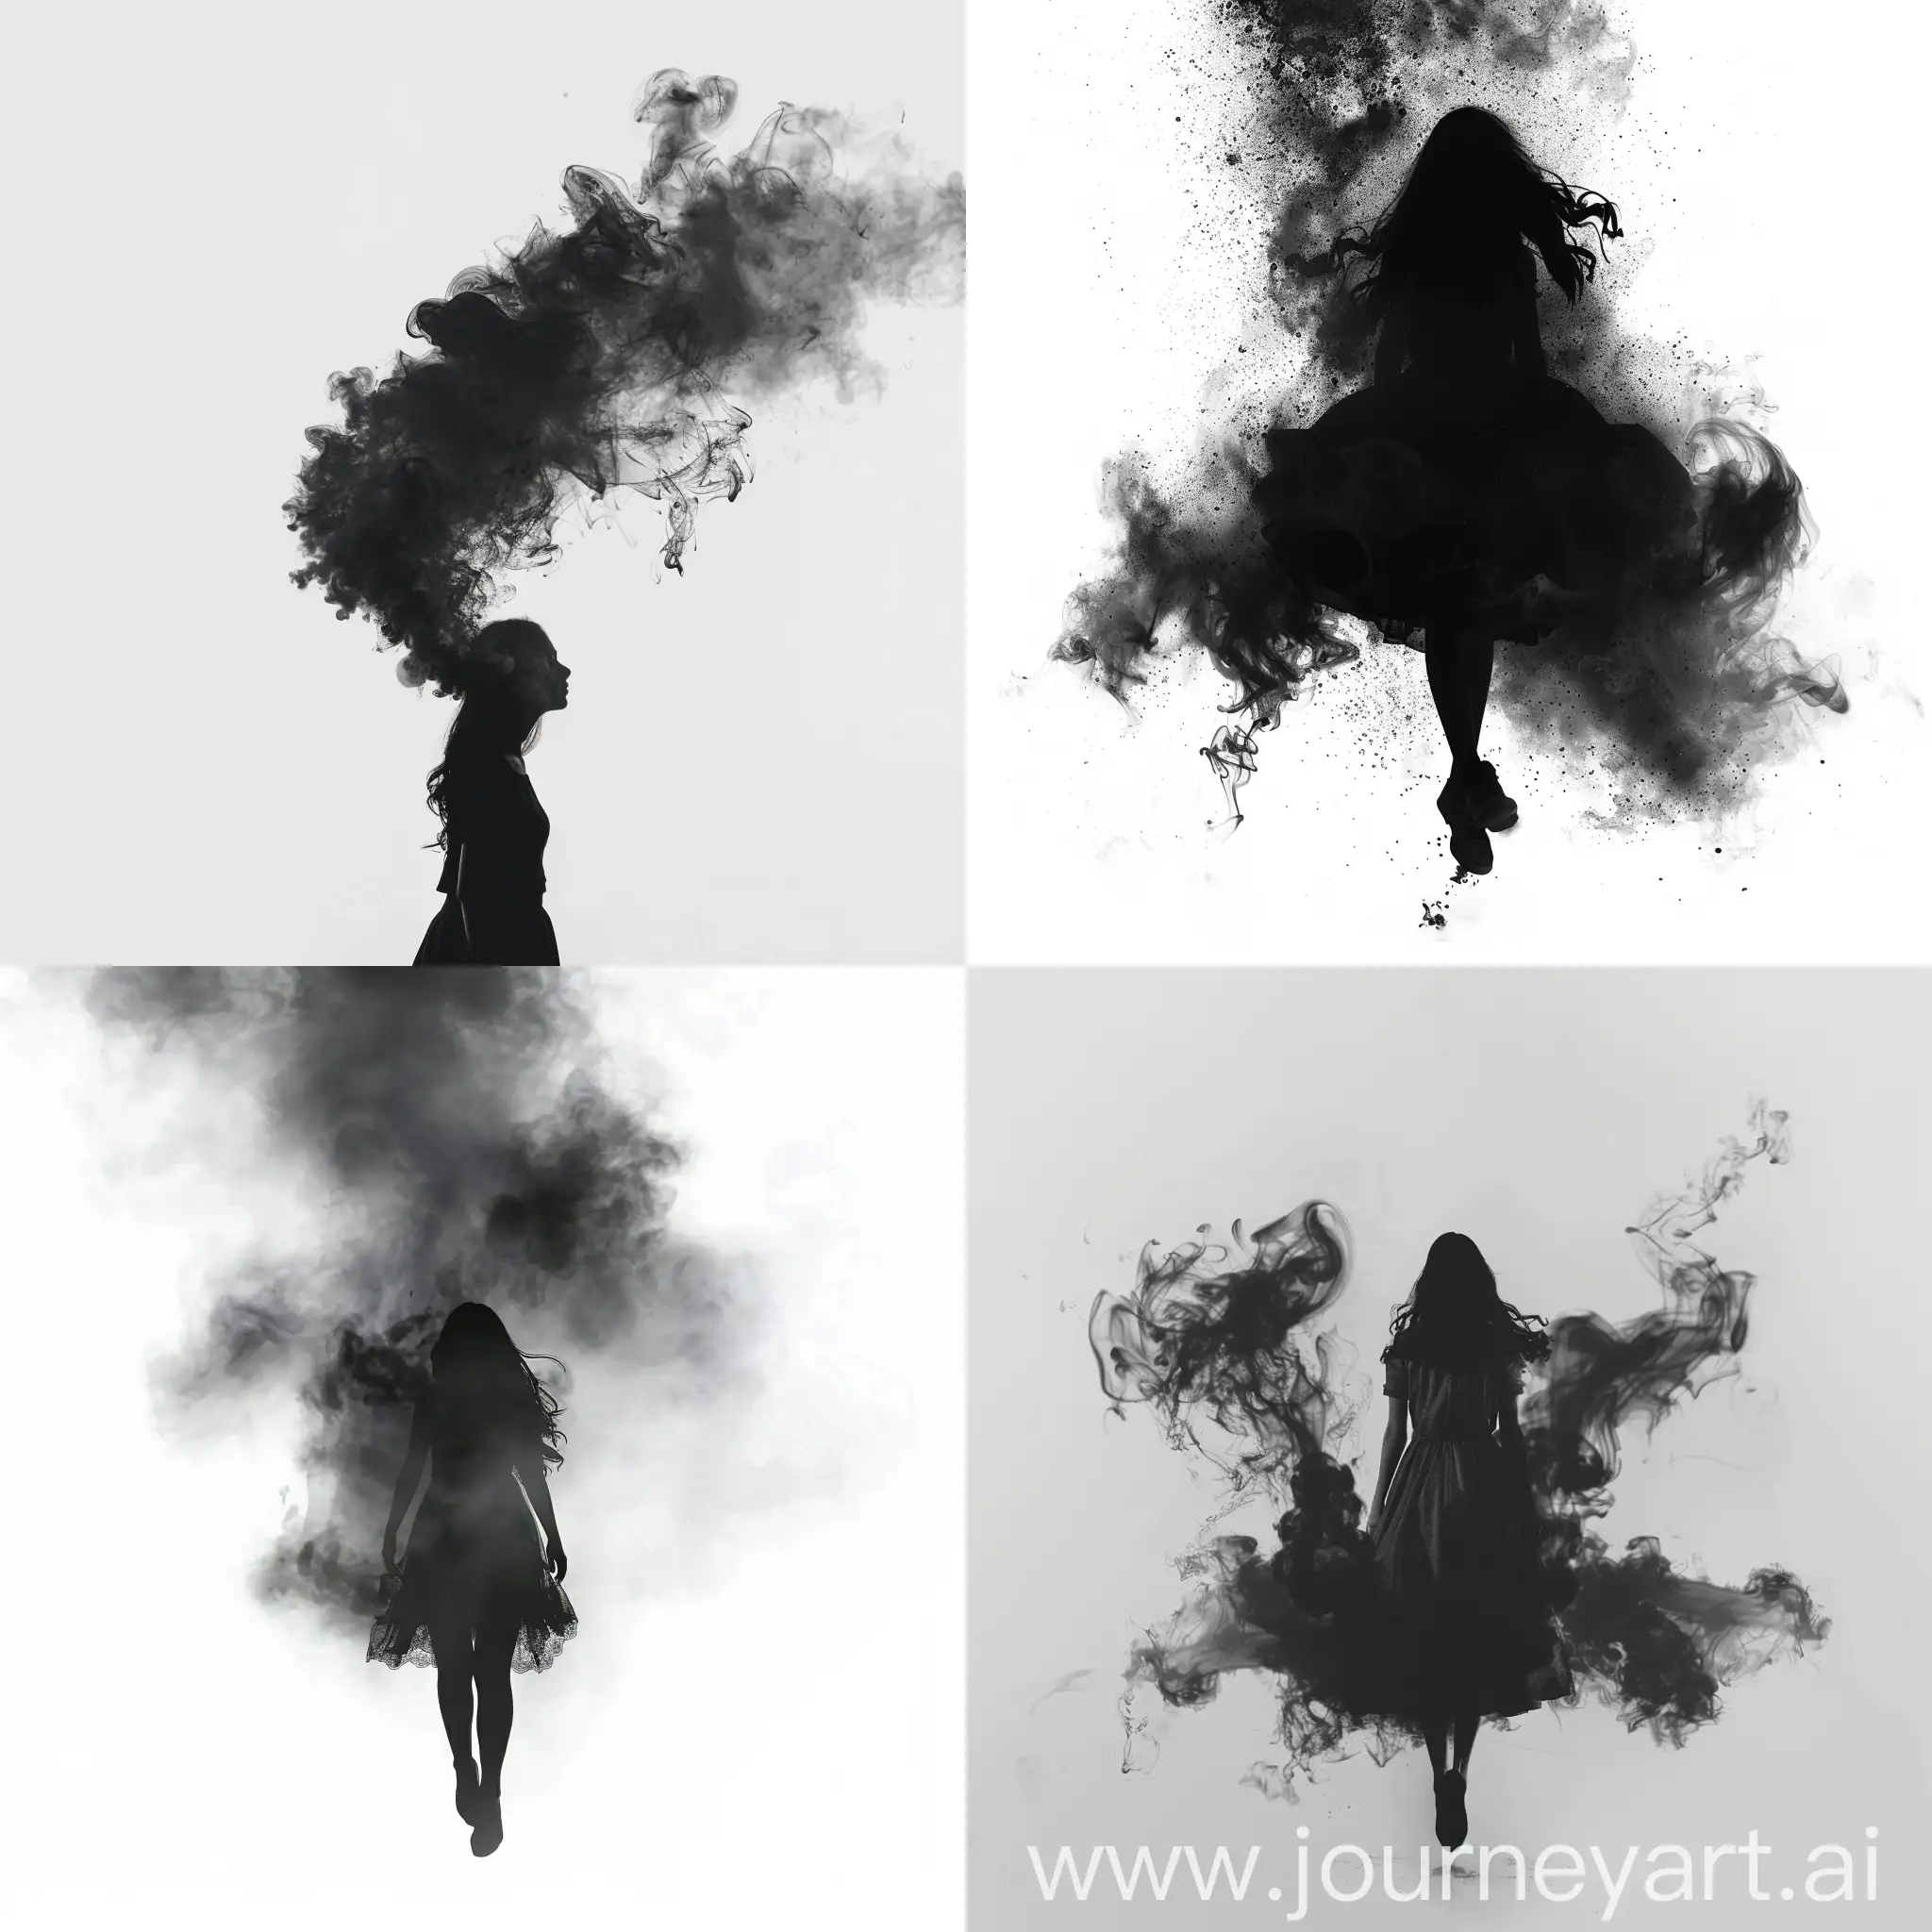 the shadow of the girl dissolves in the air on a white background so that the lower part has already disappeared into the air leaving black clouds of smoke